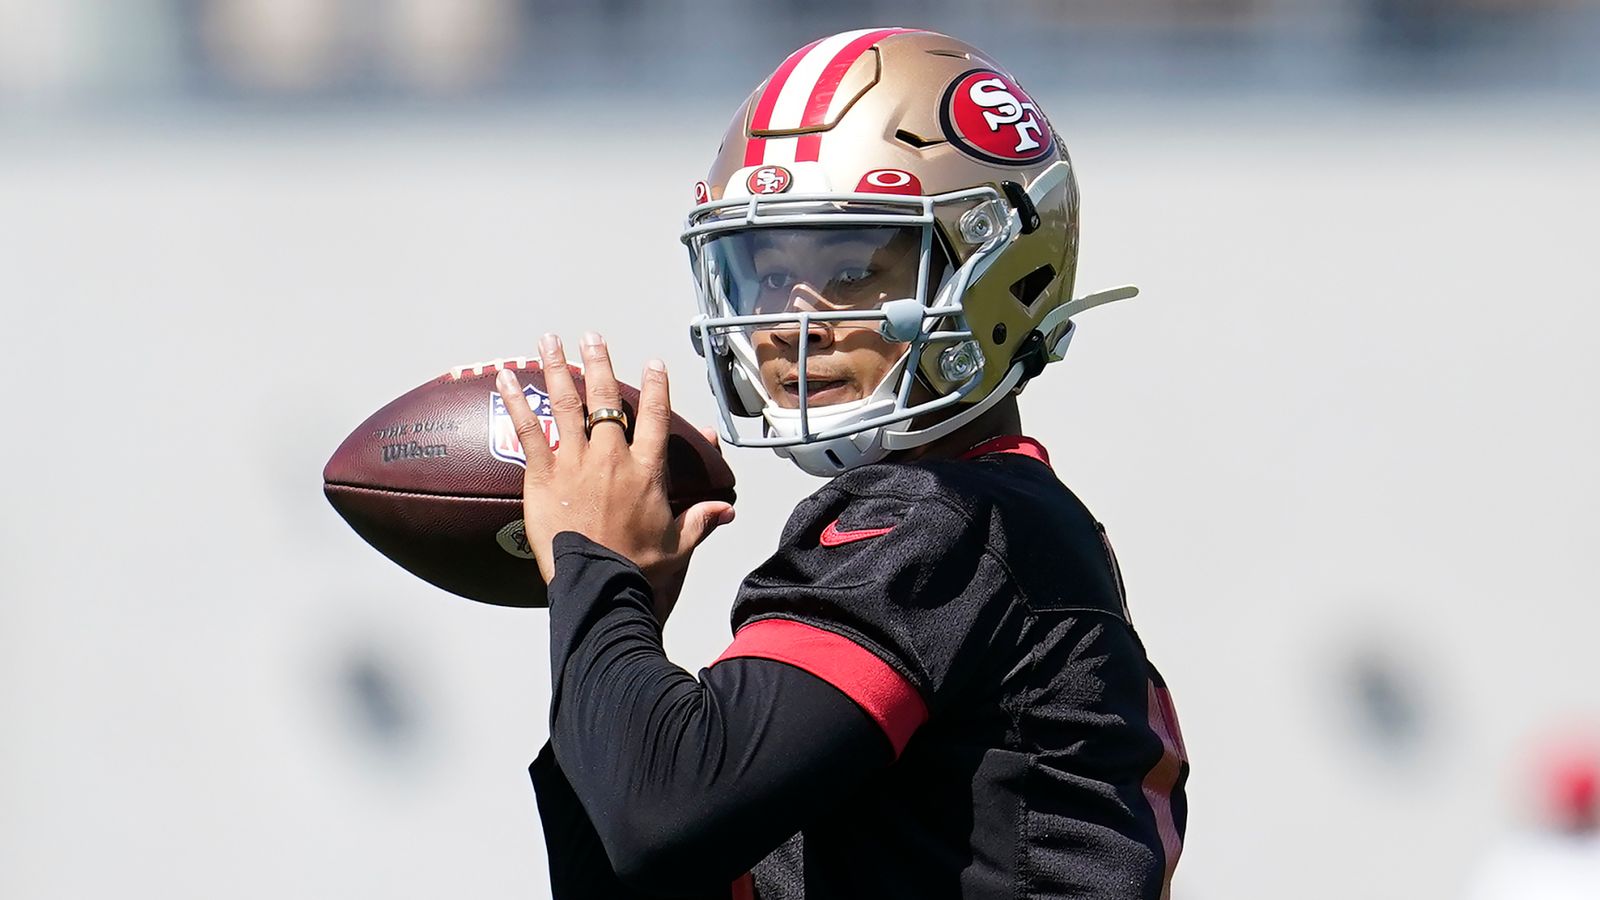 Trey Lance officially starting quarterback for San Francisco 49ers, while Deebo Samuel reports for training camp